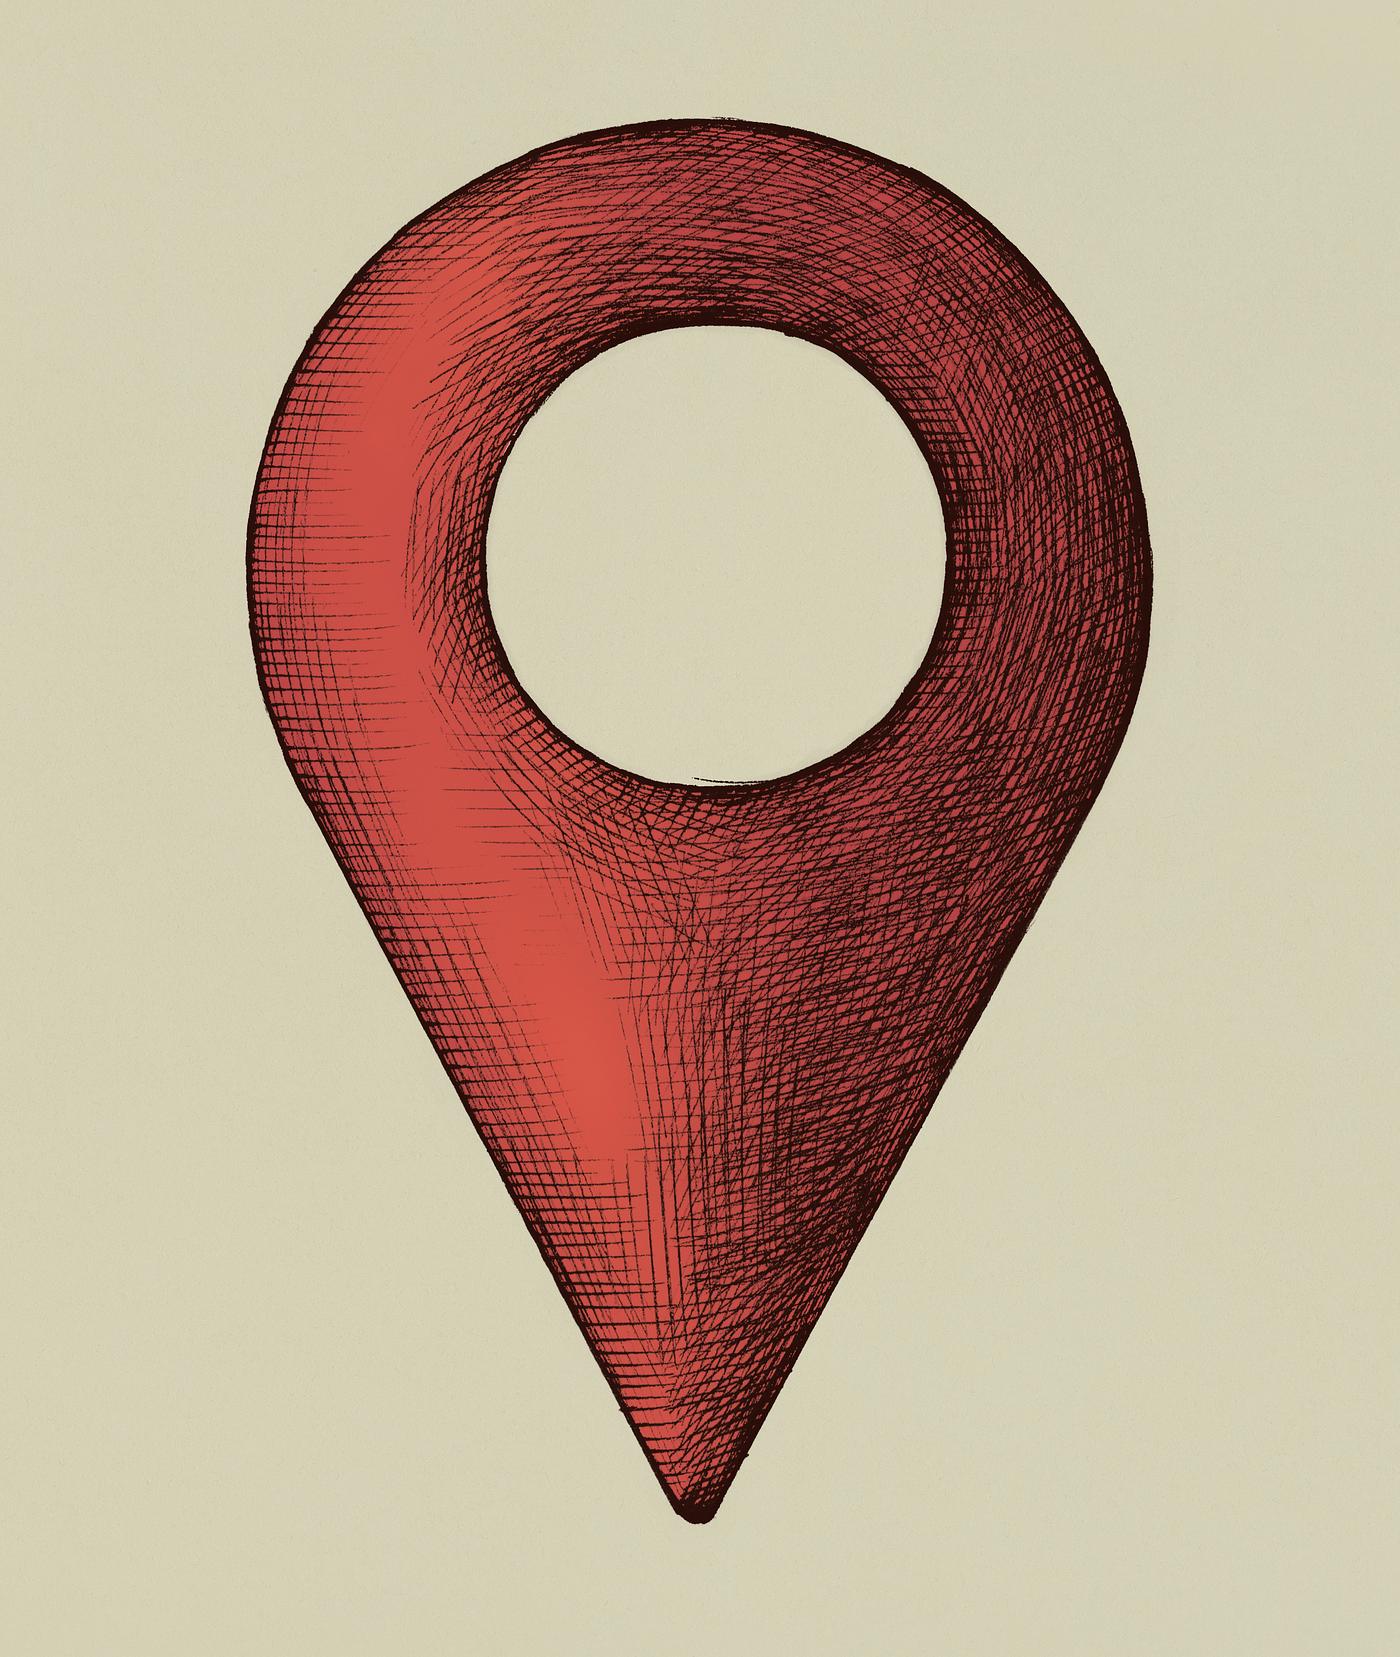 Hand Drawn Red Location Pin Illustration Royalty Free Stock